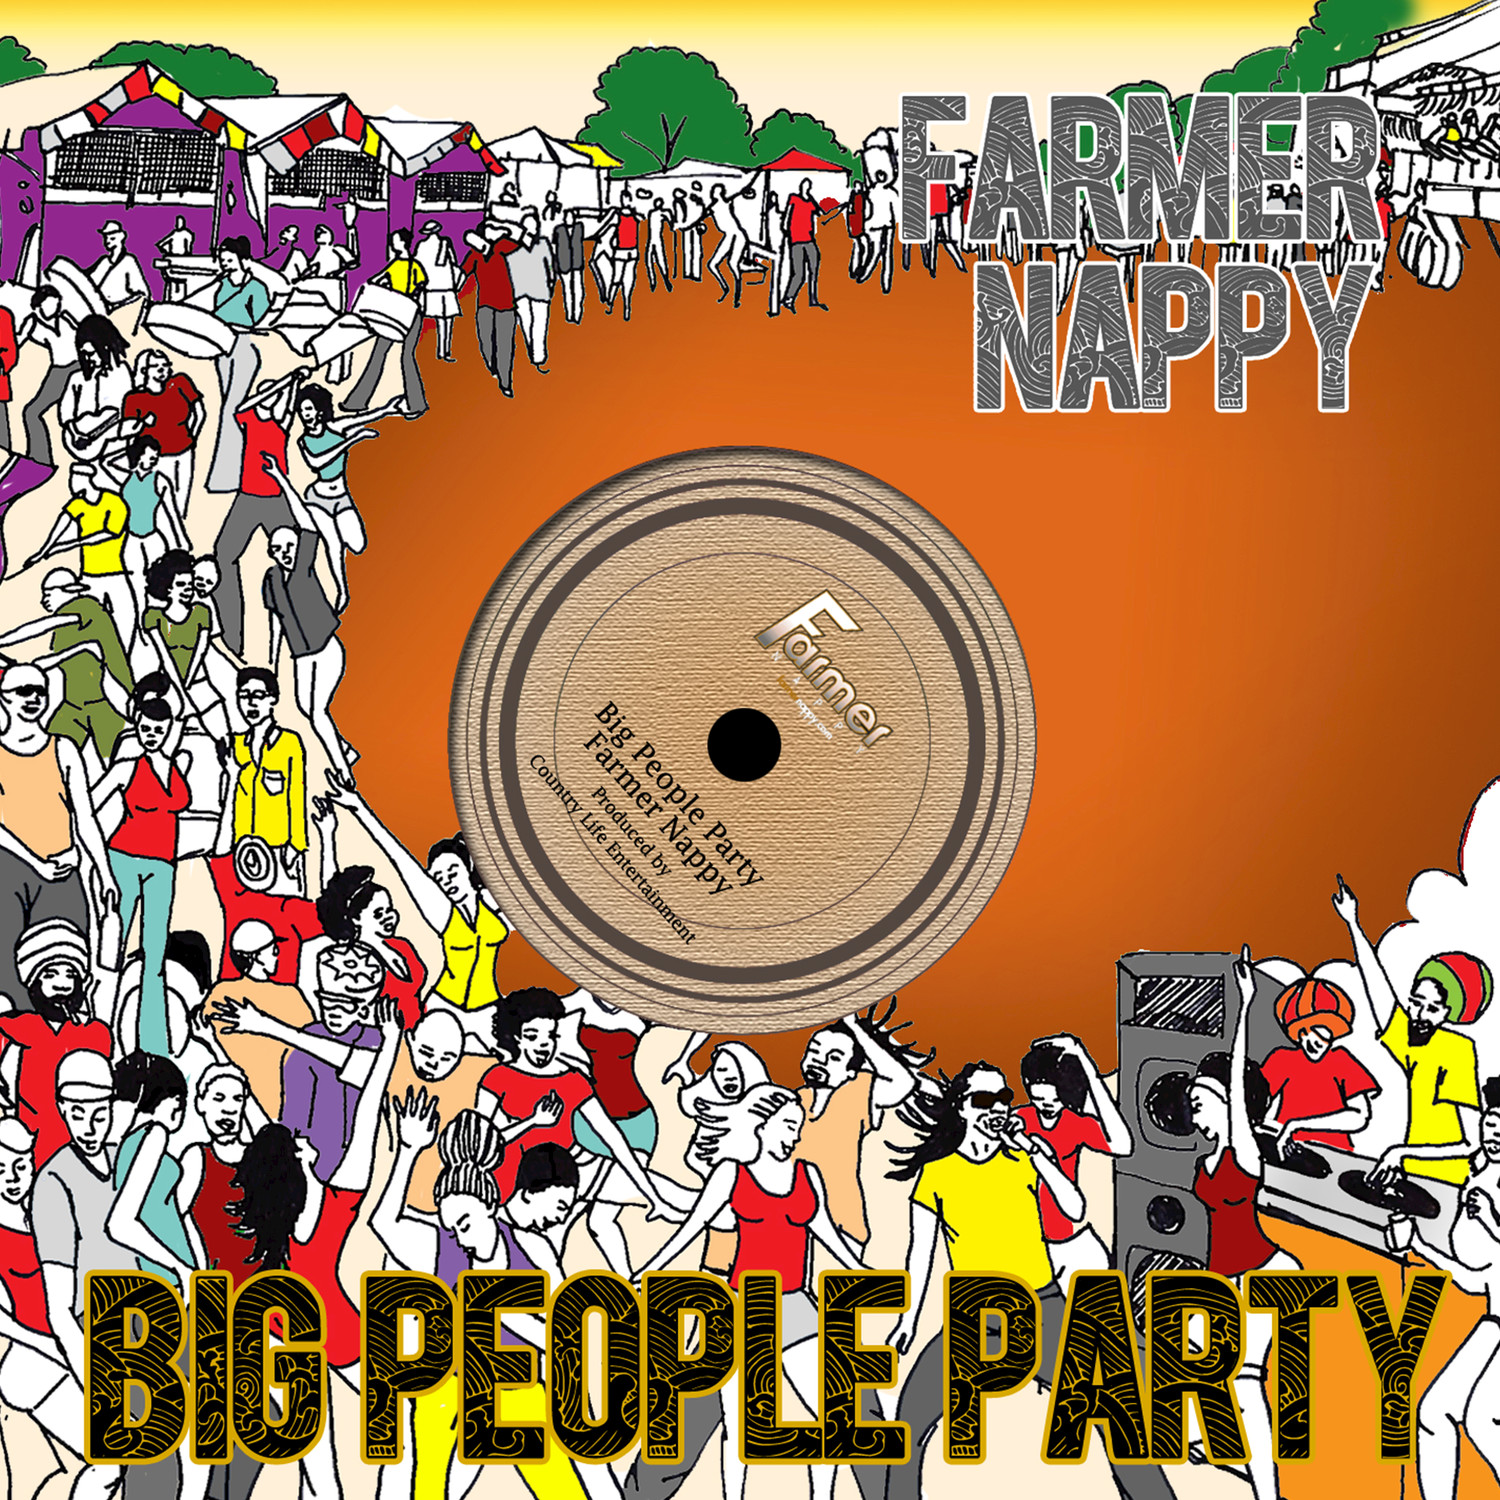 Big People Party